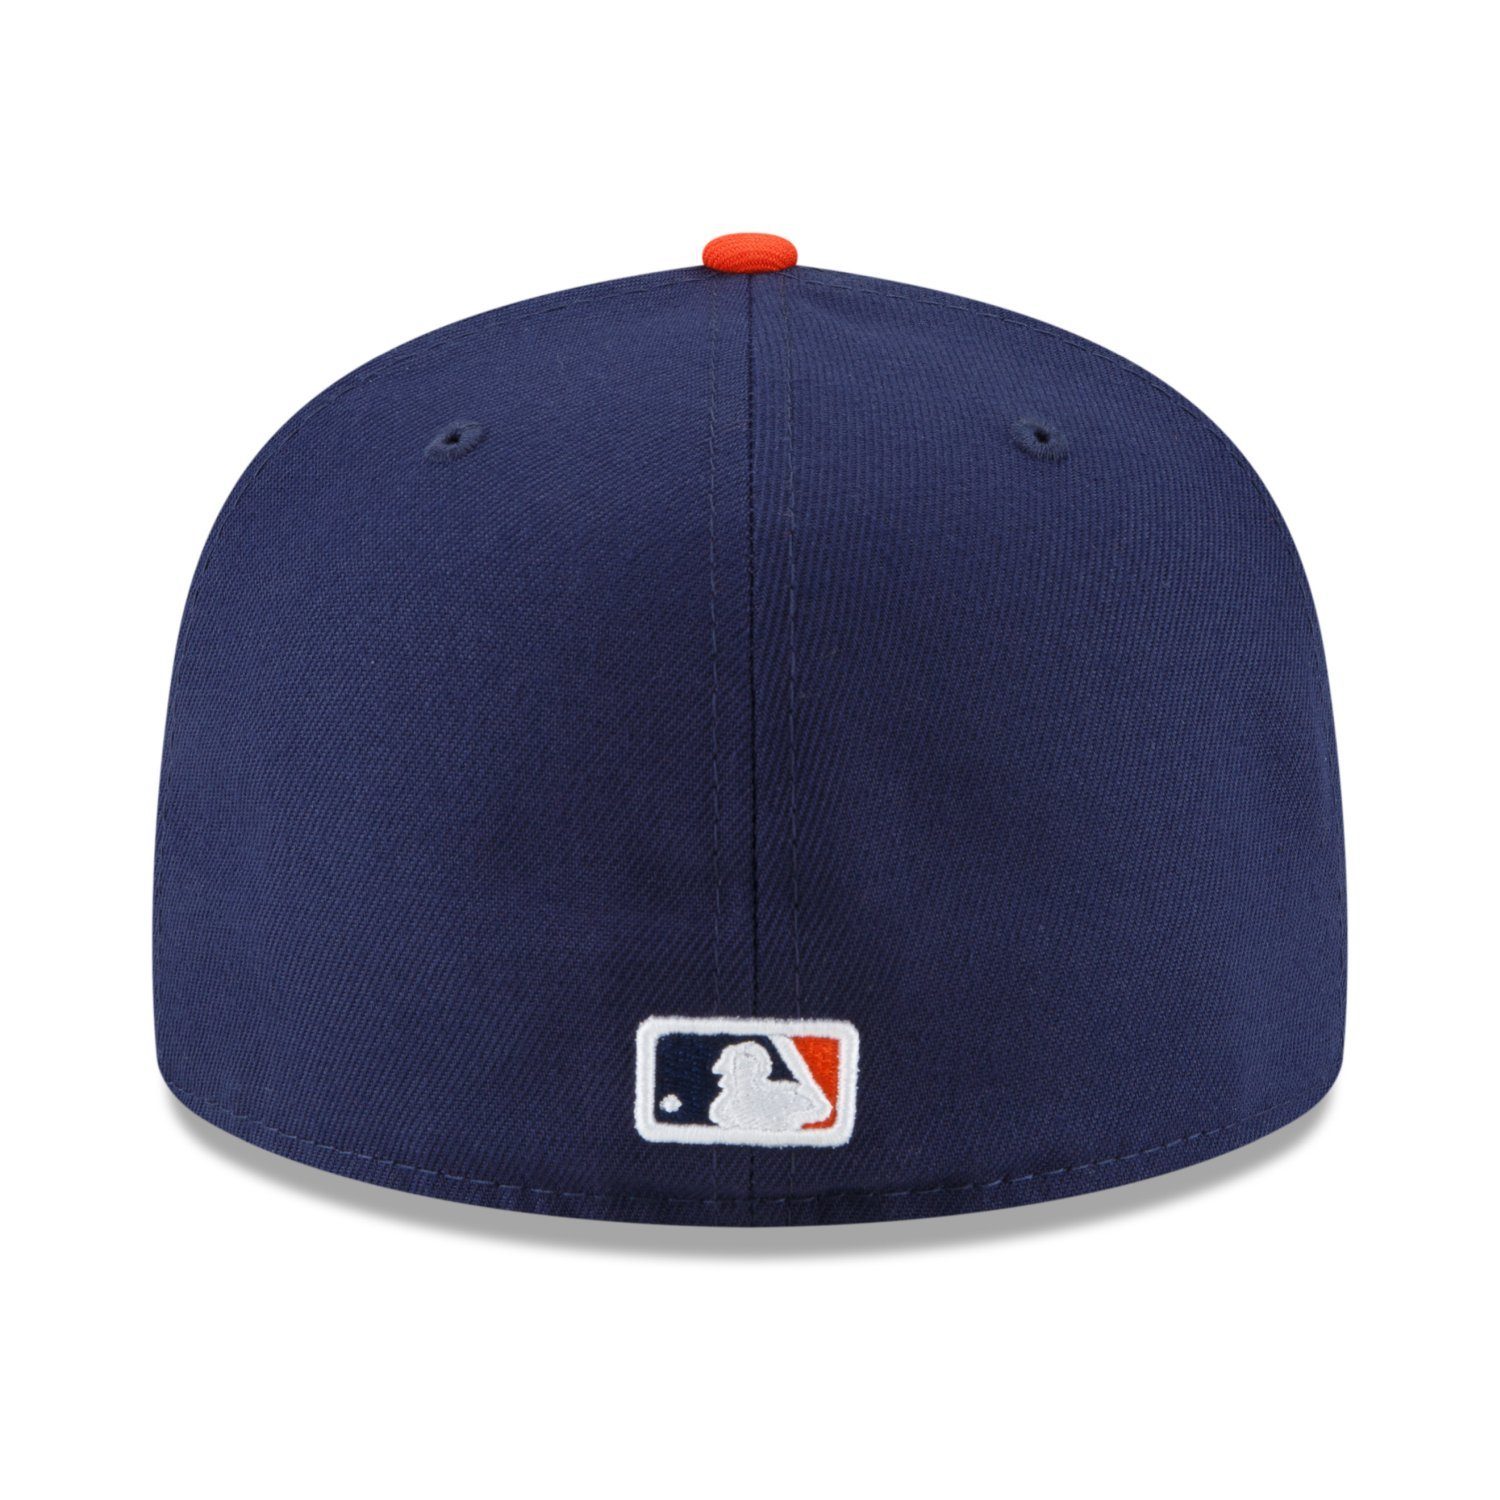 New Era Fitted 59Fifty Astros Houston CONNECT Cap CITY